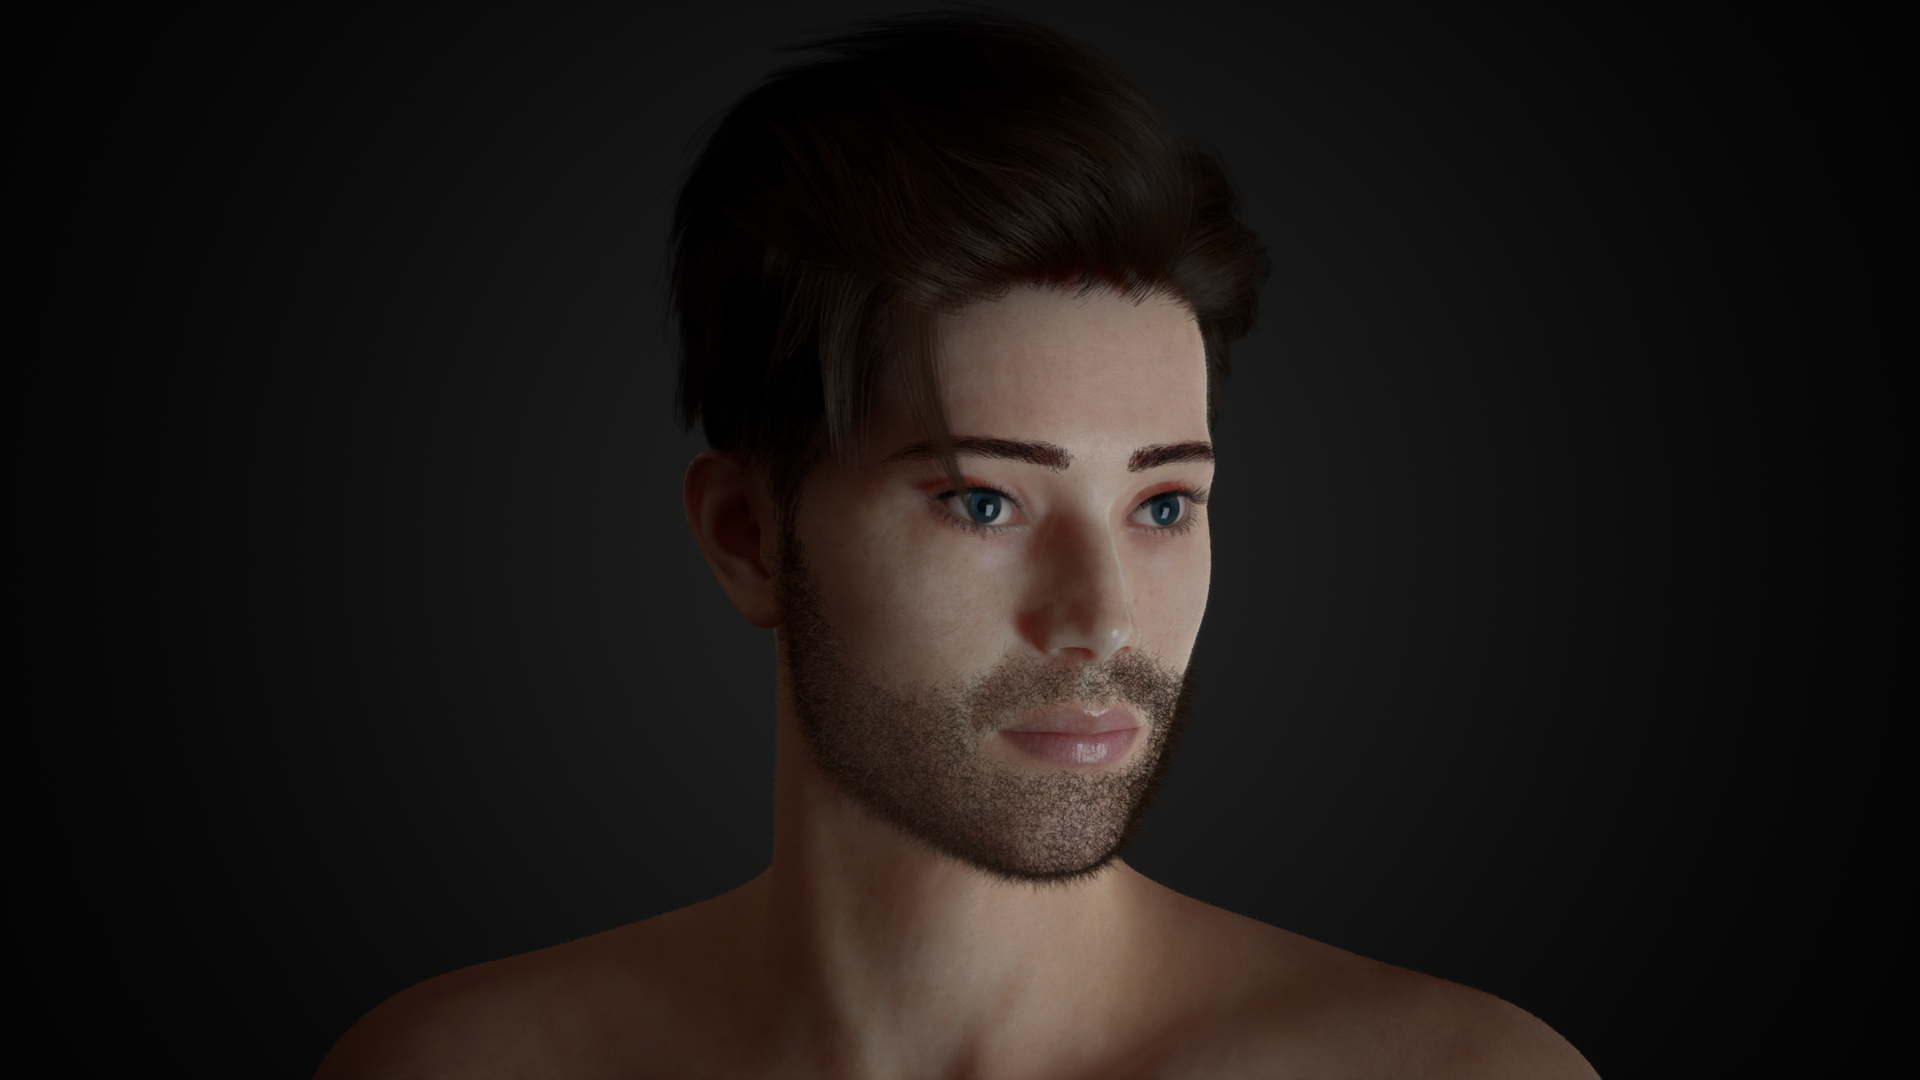 In-game footage of a Male character created inside our character creation tool.